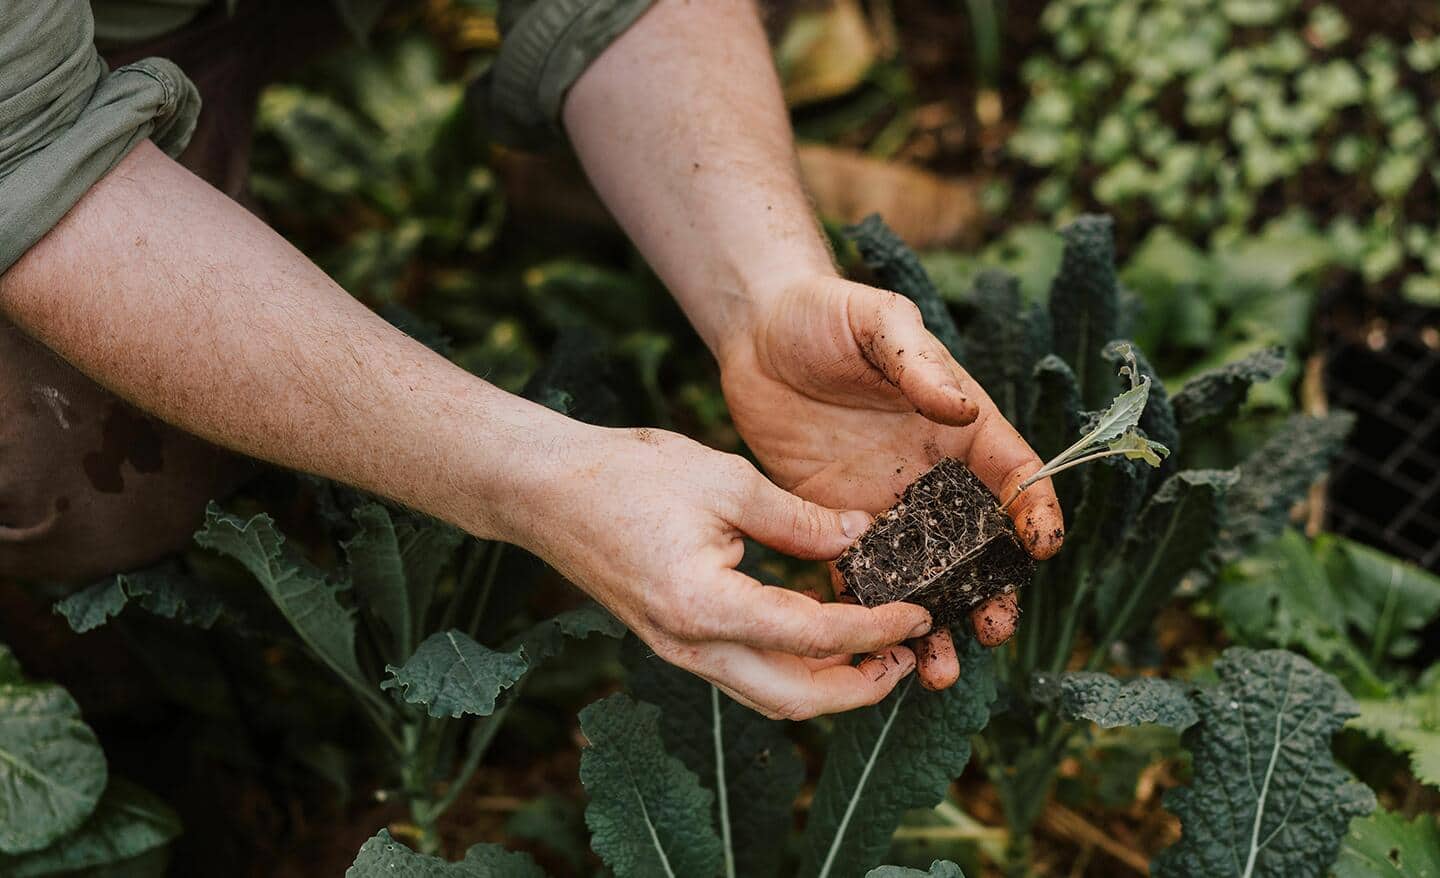 Gardener holds a kale seedling ready to be planted in a vegetable garden